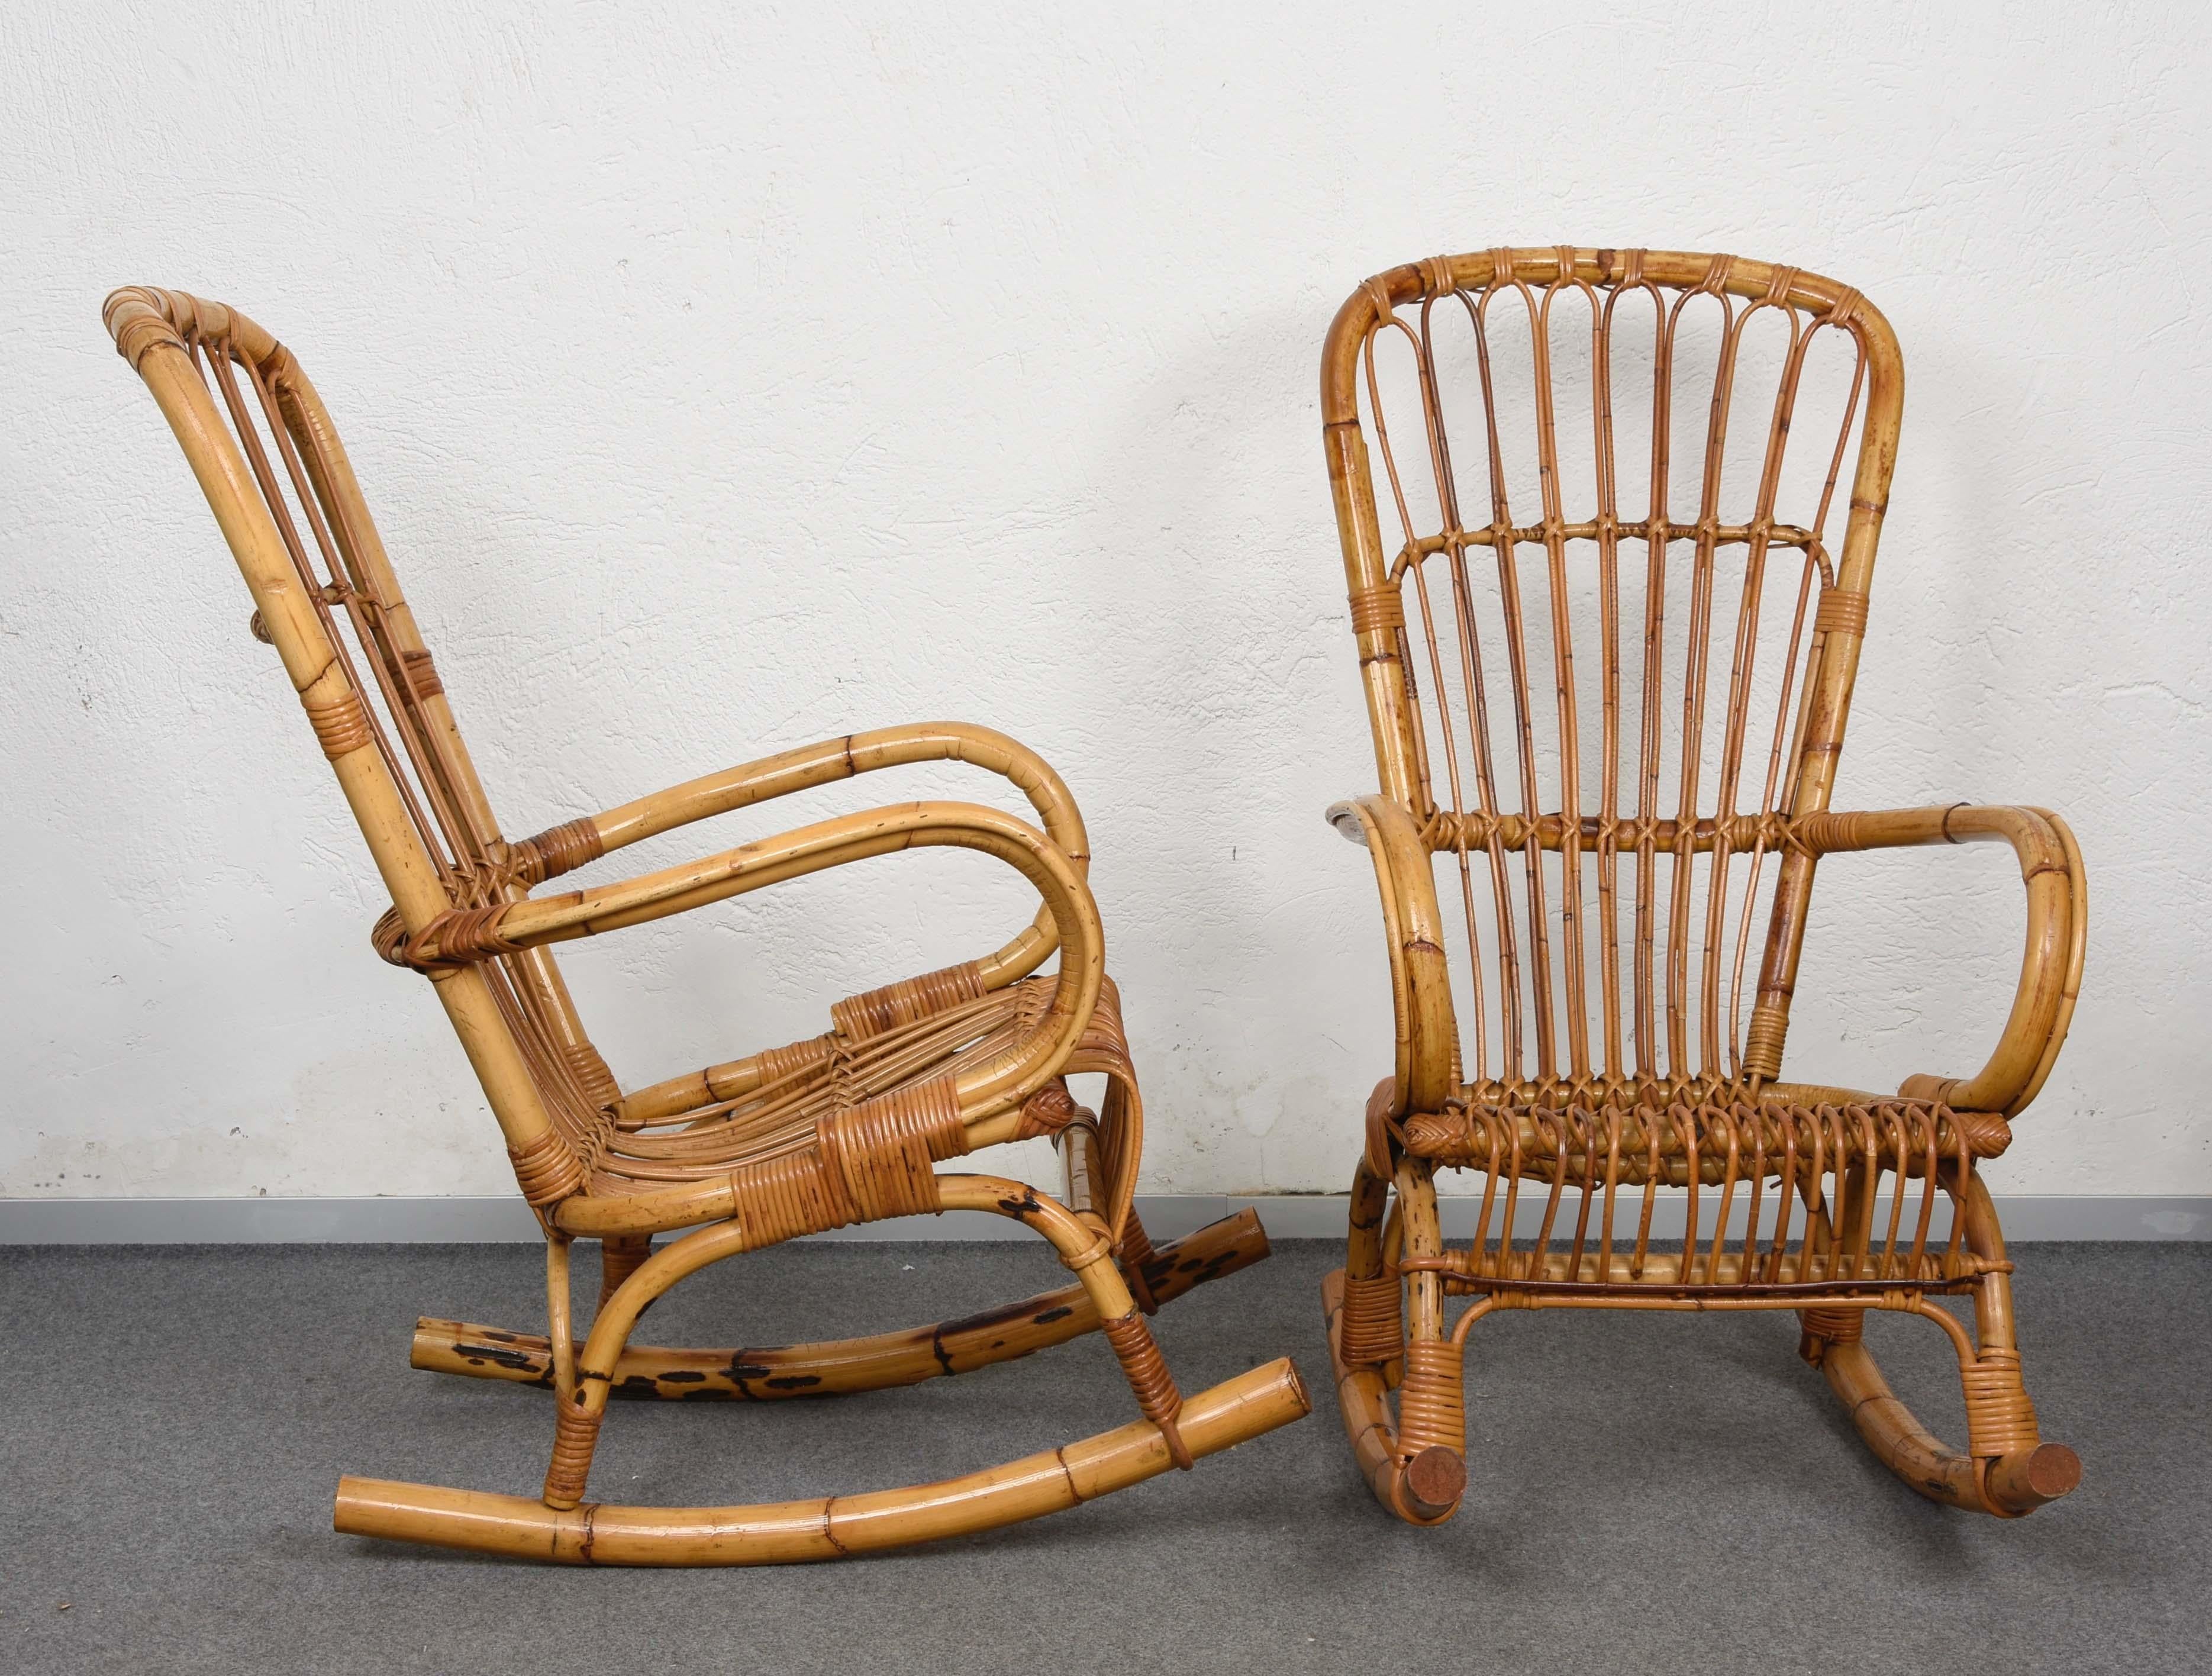 Pair of Midcentury Cote d'Azur Rattan and Bamboo Italian Rocking Chairs, 1960s For Sale 6